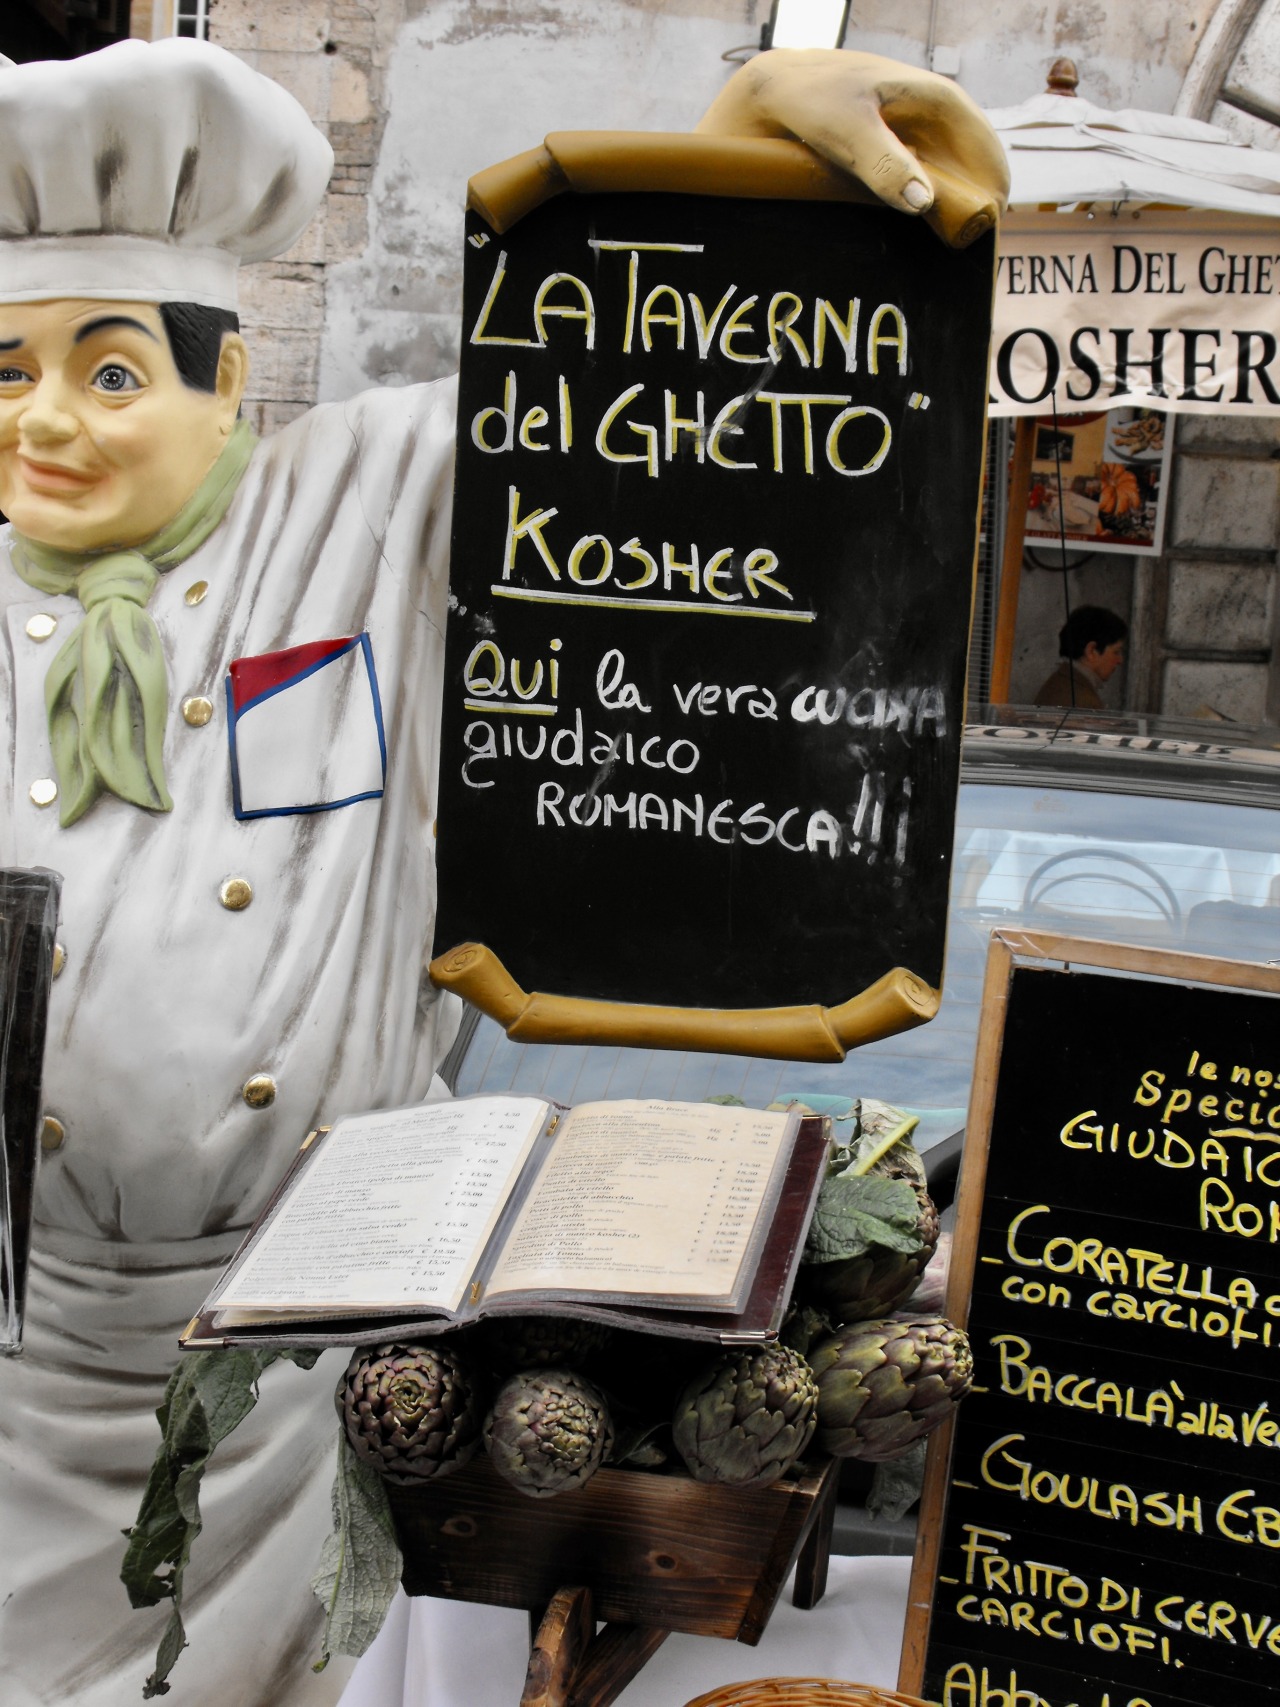 La Taverna del Ghetto, ristorante, Roma, 2009. . The promotion in front of the restaurant includes artichokes, the base for perhaps the most famous Roman Jewish delicacy Carciofi alla Giudia. Recently the dish was declared non-kosher by a rabbinical board in Jerusalem. A traditional dish, and a delicious one, in the kosher restaurants of Rome, that decision was treated with umbrage by Rome’s Jewish population and with dismay by many other Romans who consider Carciofi alla Giudia a major winter delicacy and a star in the culinary firmament of a city known for its fine cuisine. #food#restaurants#advertising#artichokes #carciofi alla giudia #roma#lazio#italia#2009 #photographers on tumblr